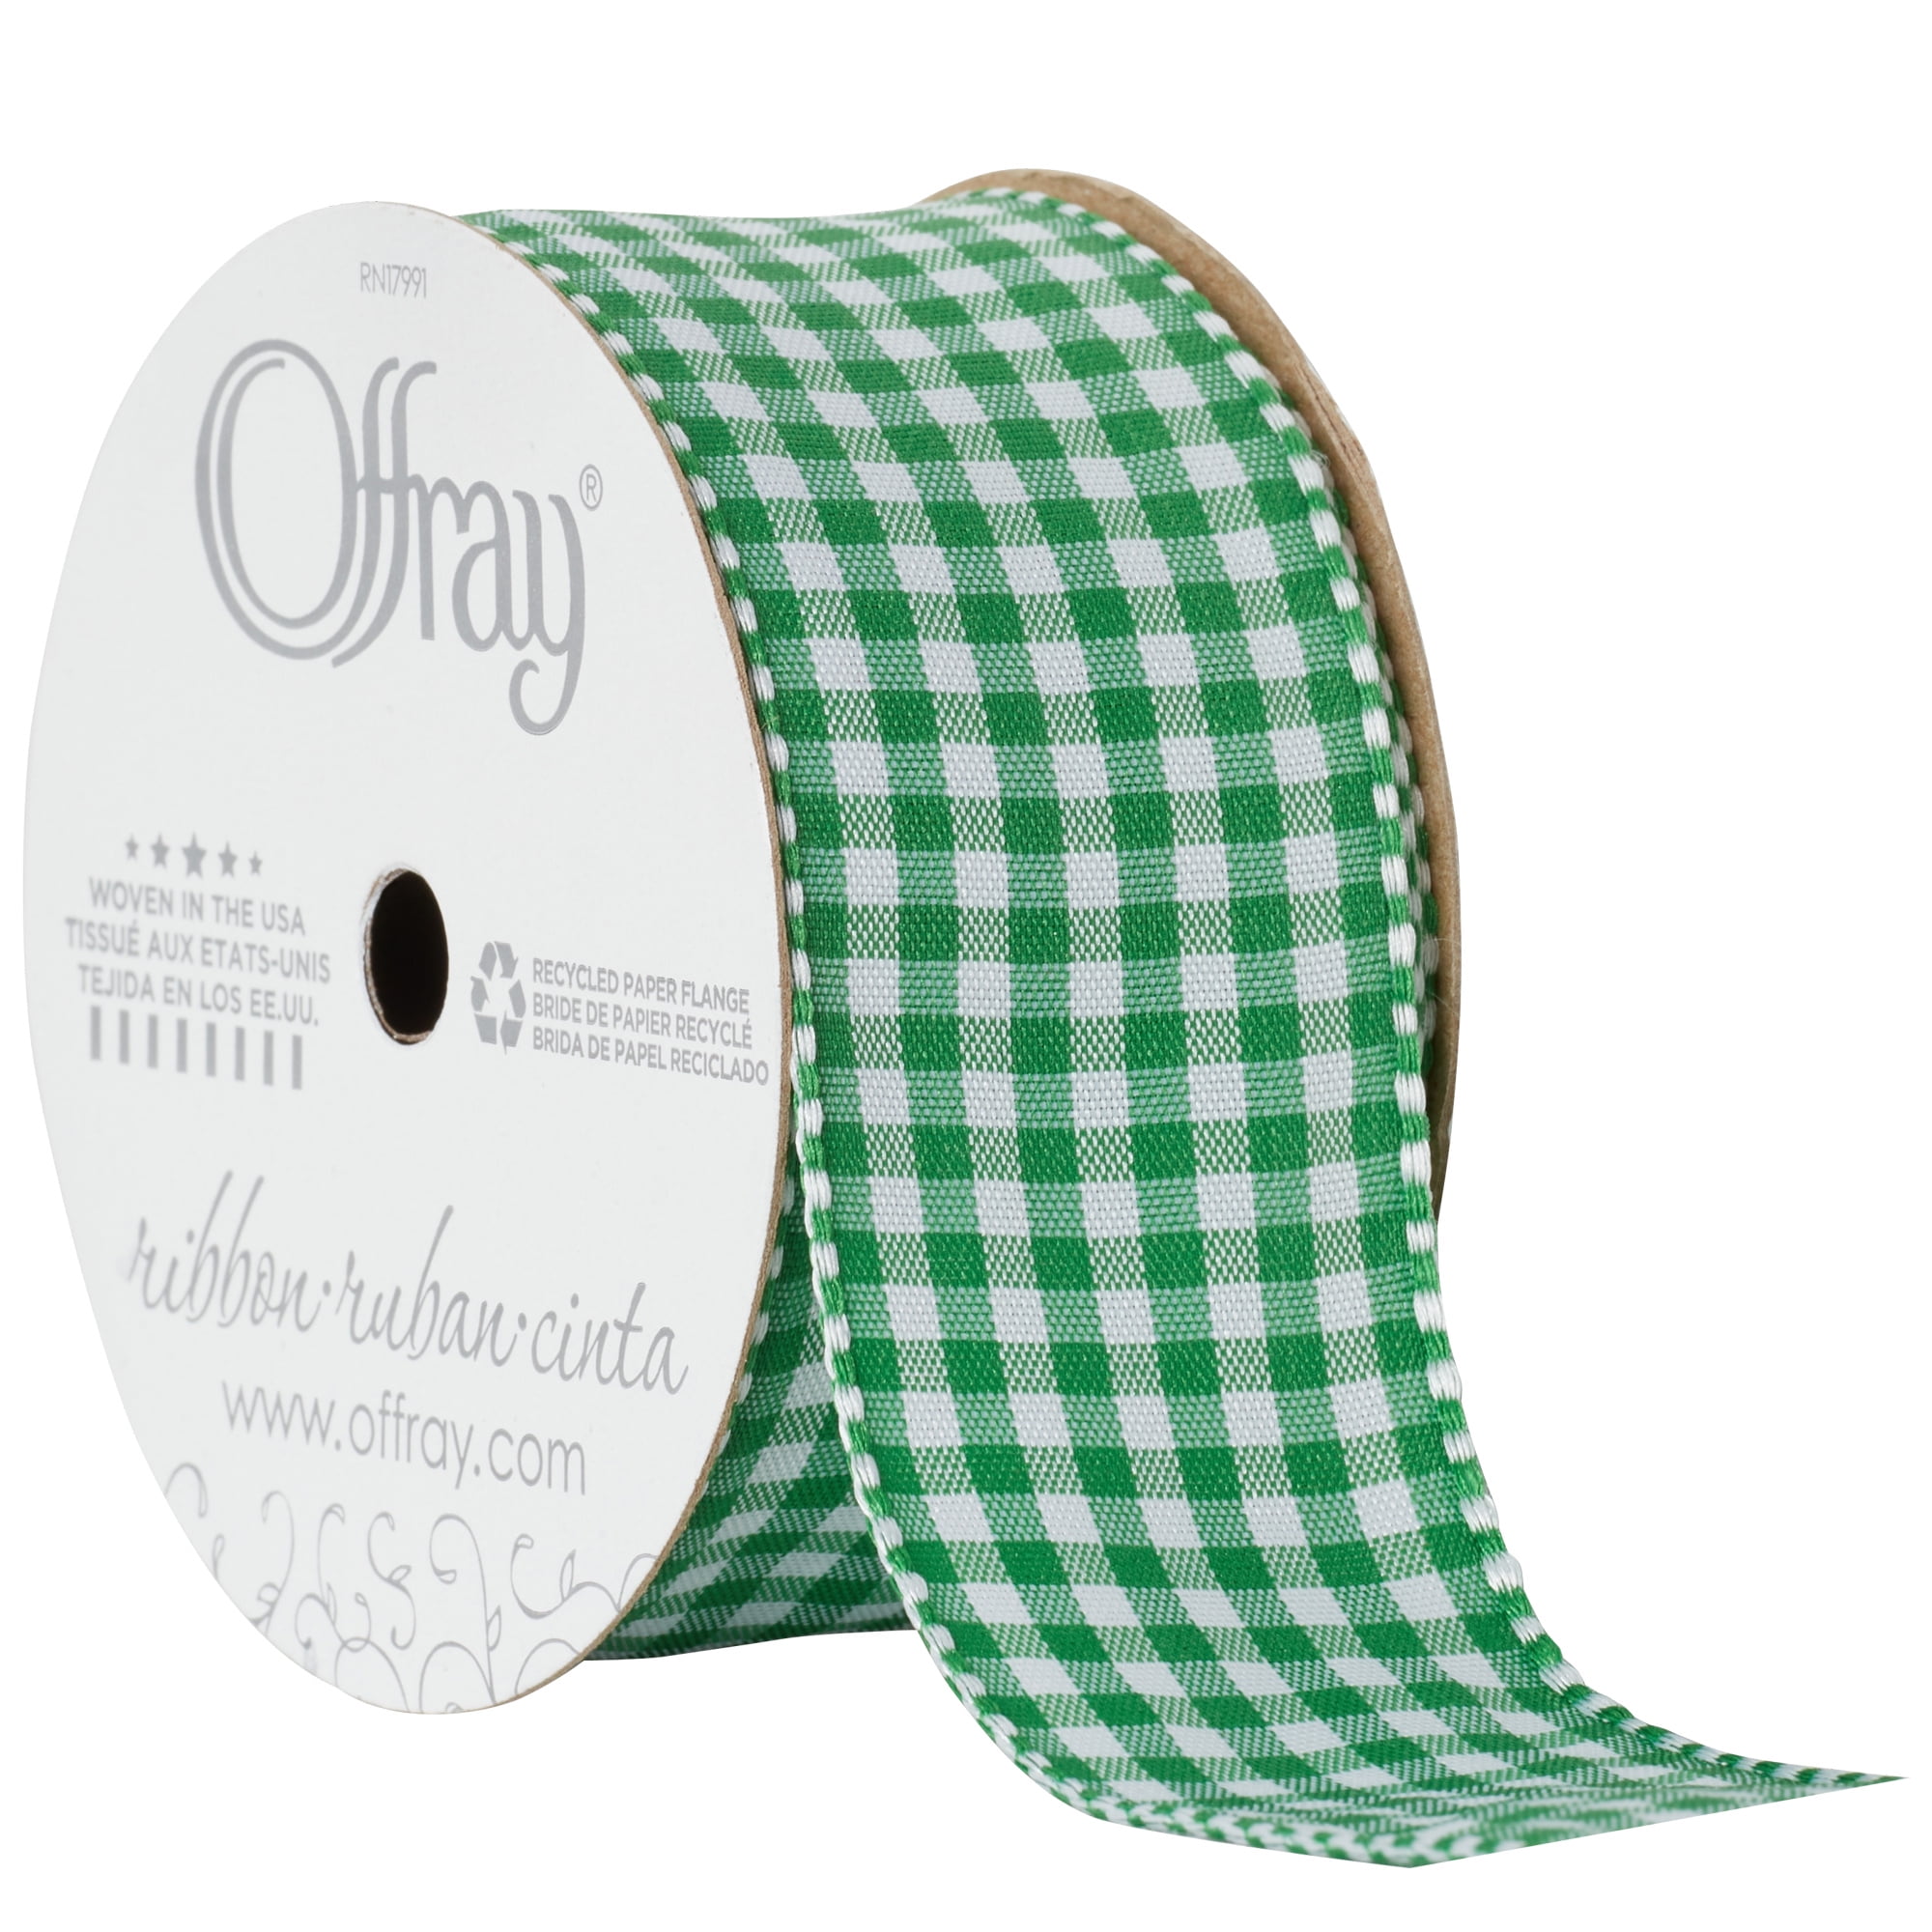 Offray Ribbon, Emerald Green 1 1/2 inch Gingham Check Woven Ribbon for Crafts, Gifting, and Wedding, 9 feet, 1 Each